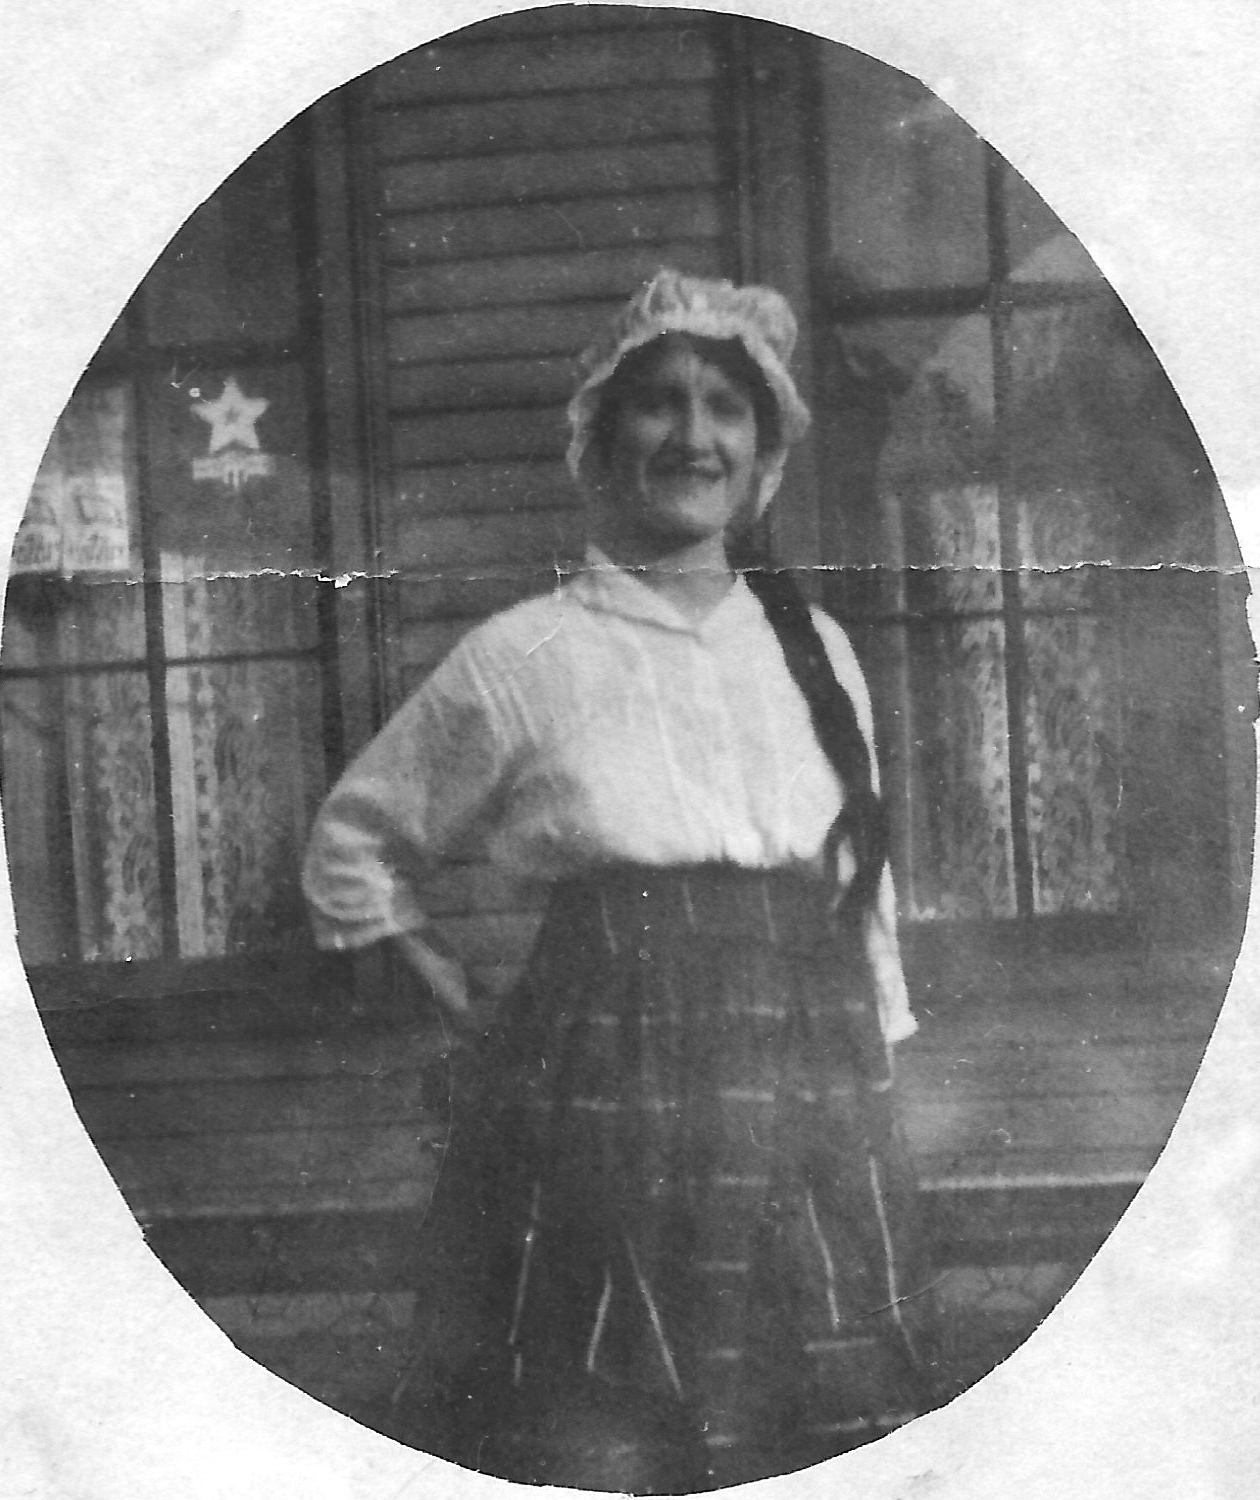 Mom, dressed for a party, 1920